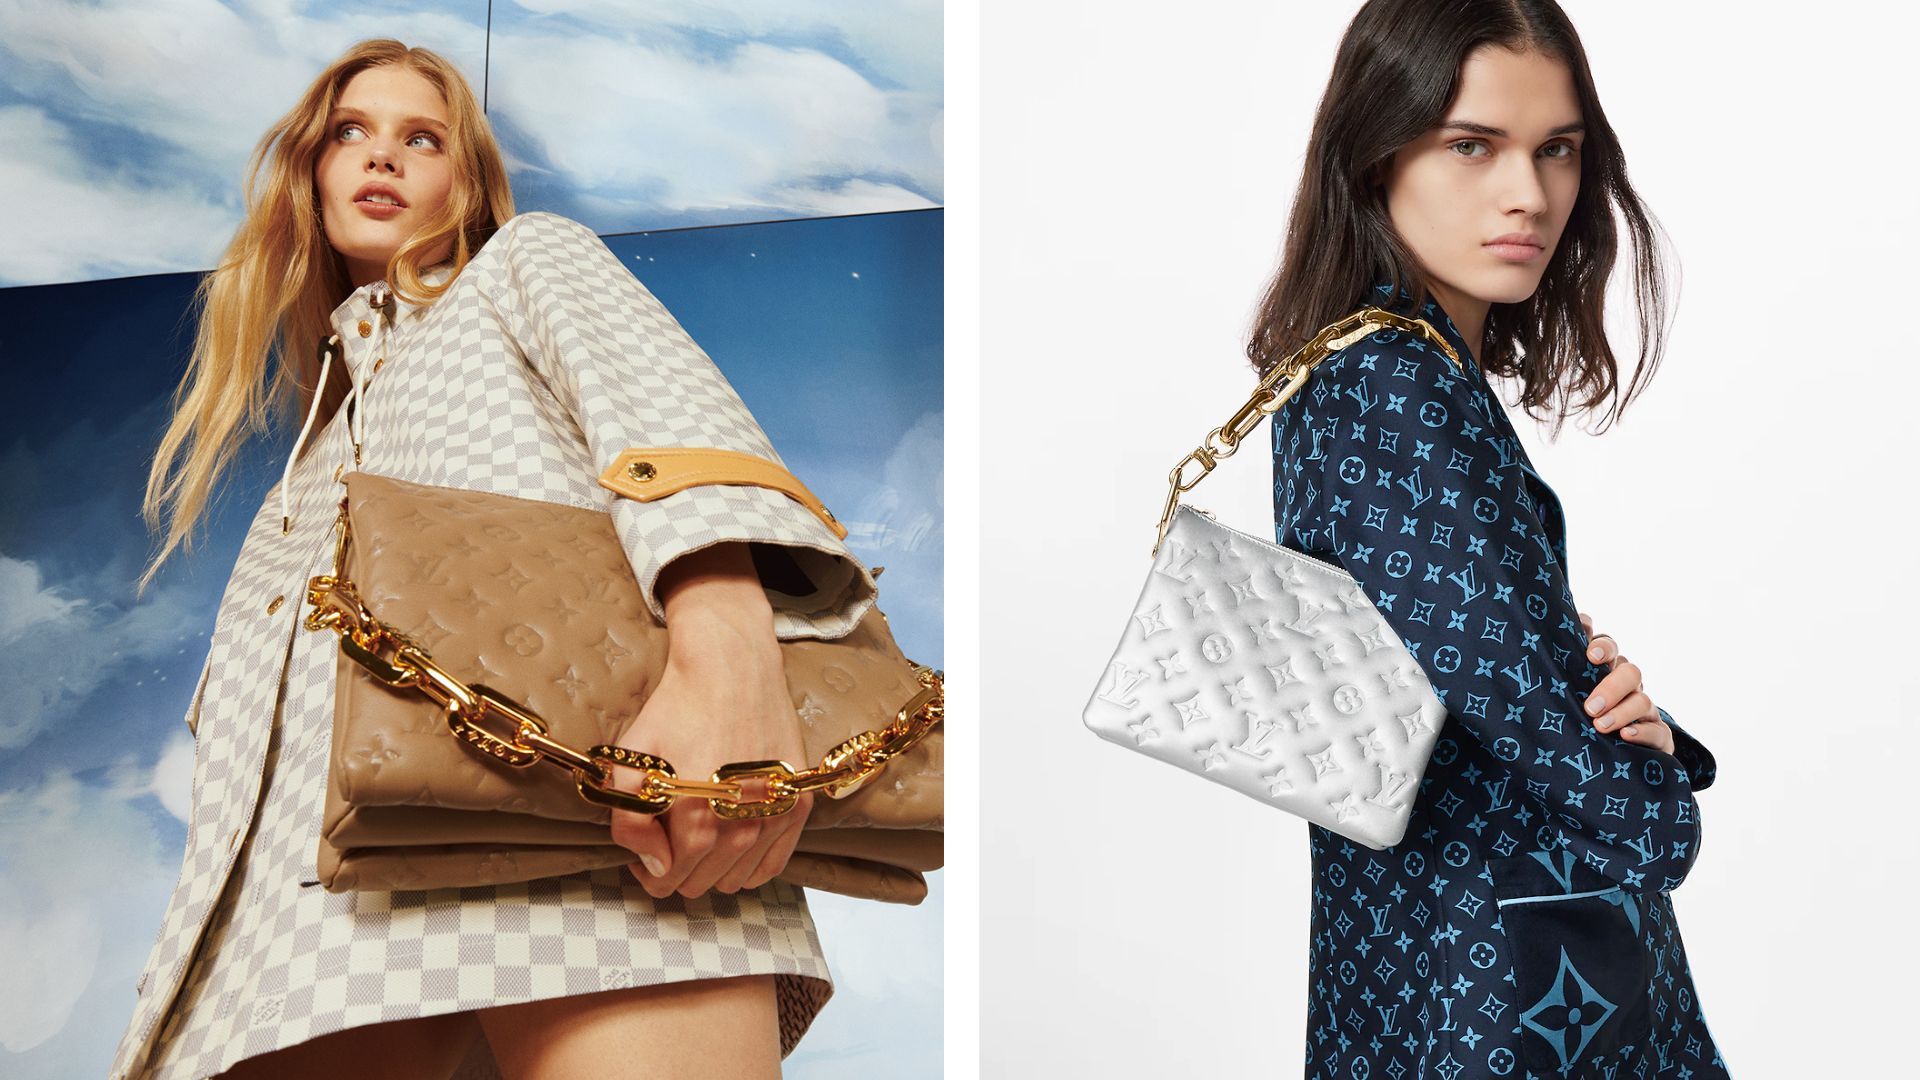 Check out our top 5 LV bag guide! #louisvuitton #speedy #neverfull